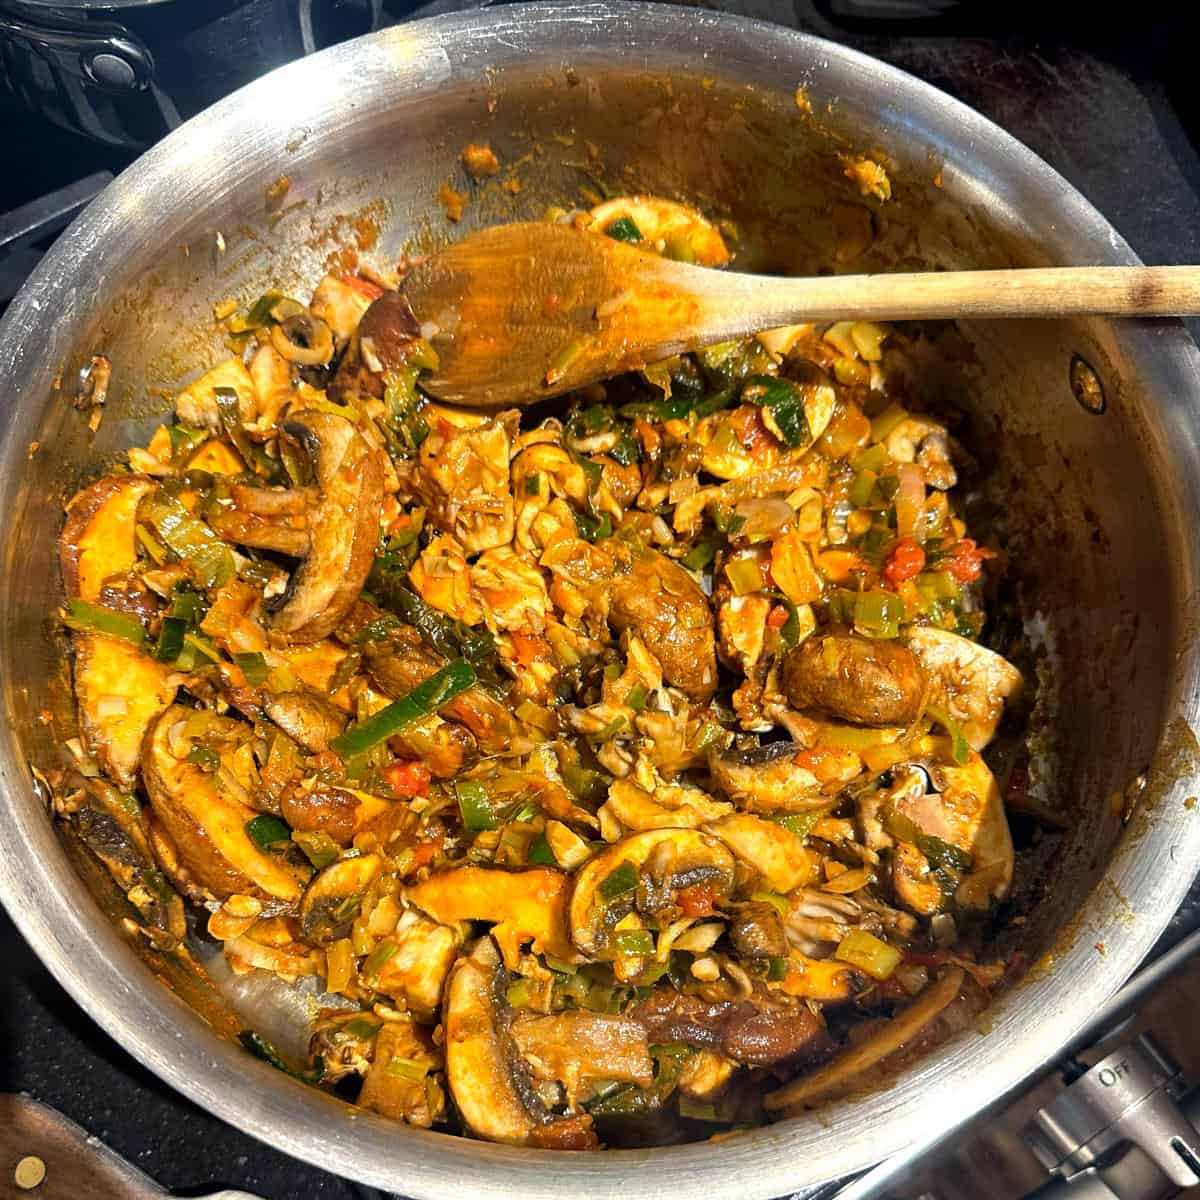 Mushrooms stirred into the leeks and tomatoes and flour in pan.